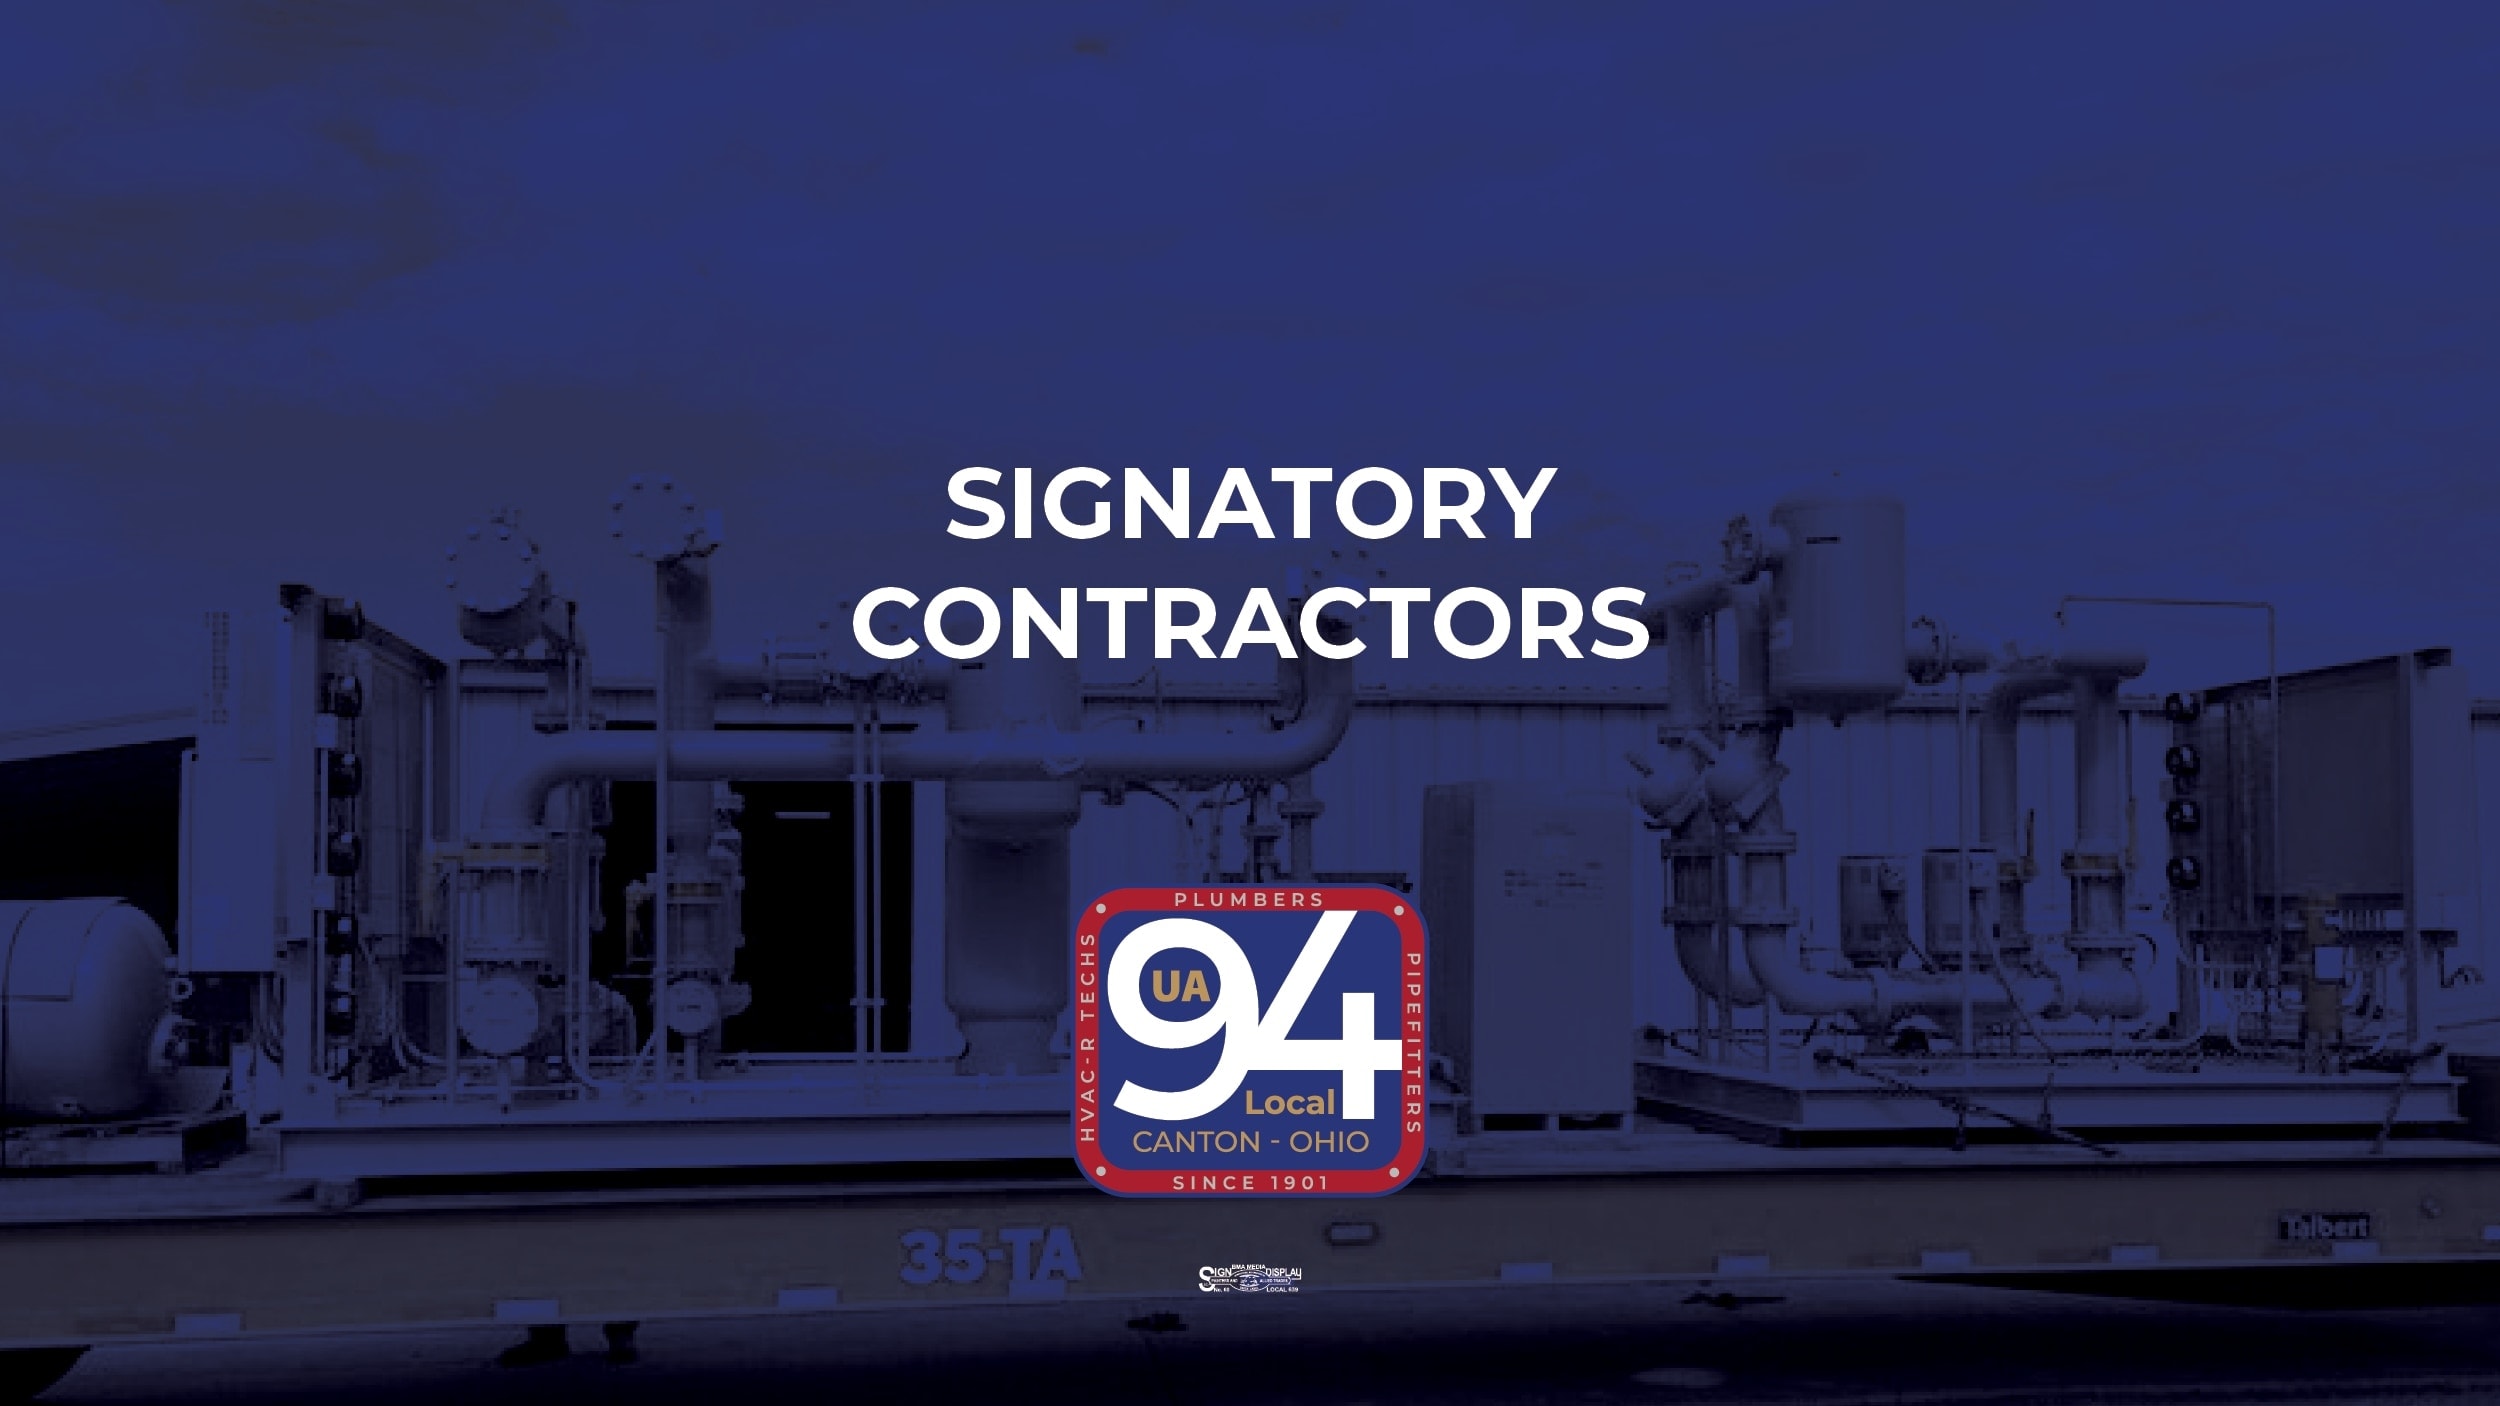 Plumbers and Pipefitters Local 94 Signatory Contractors